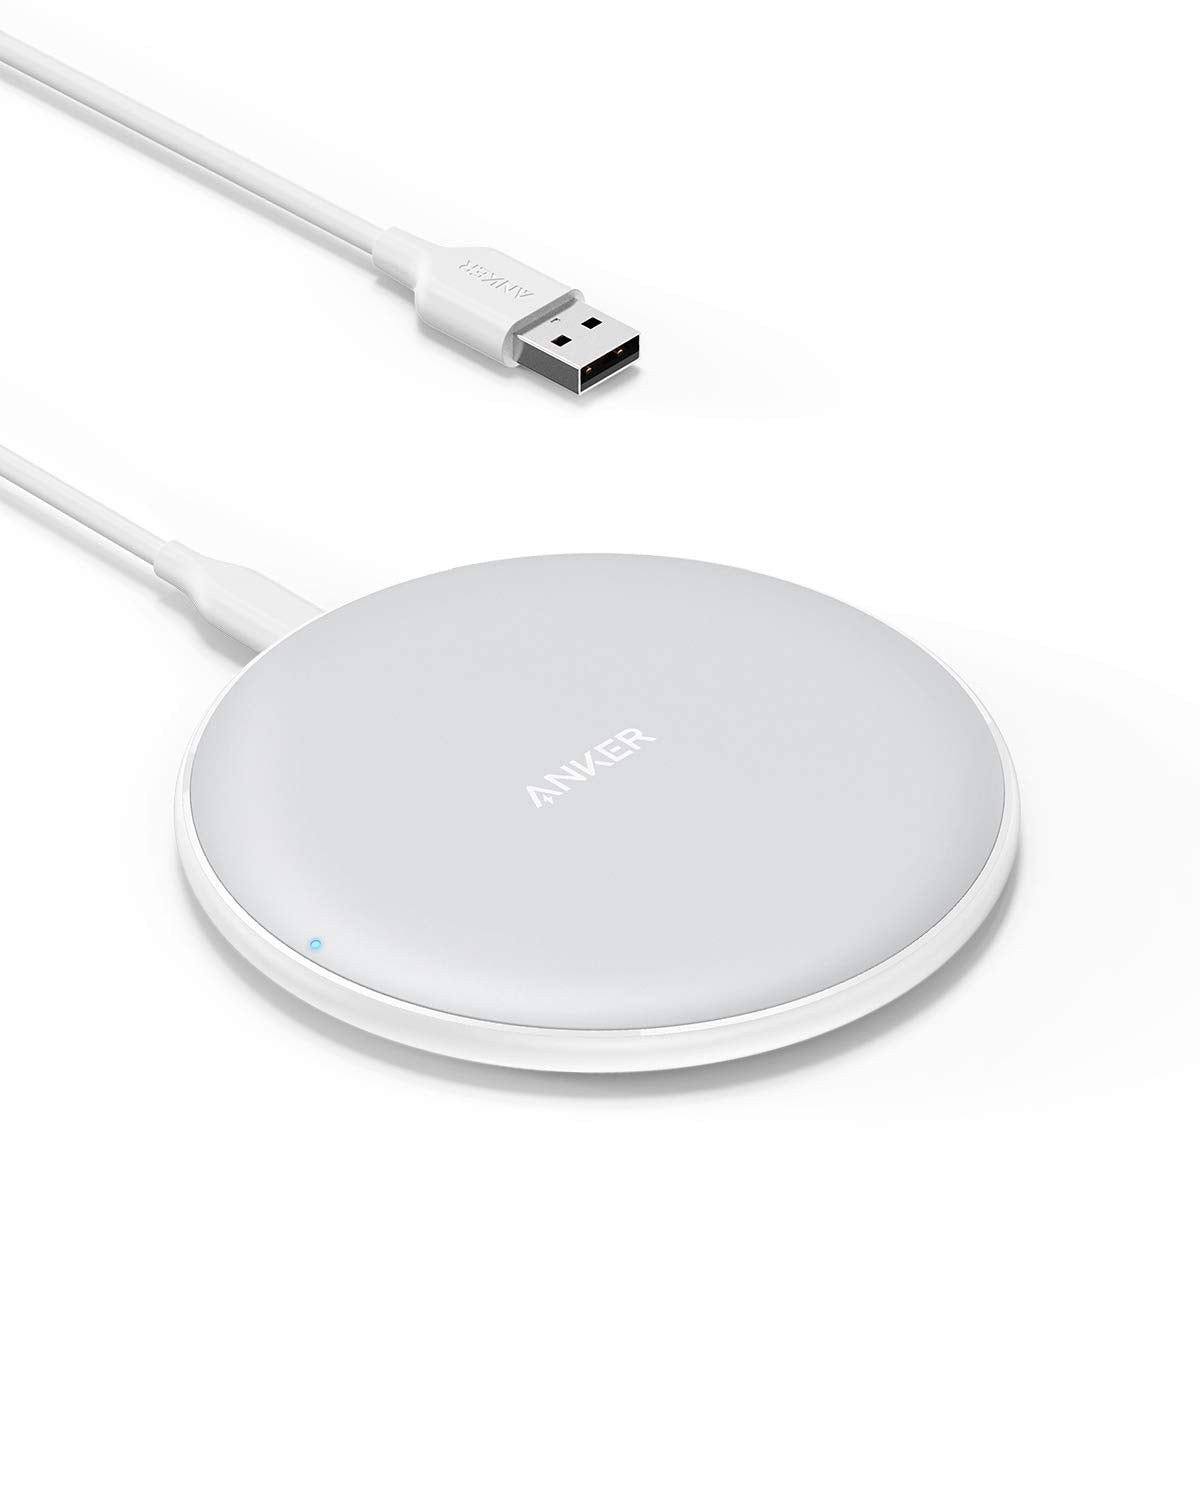 tabe Ray opstrøms Anker 313 Wireless Charger (Pad) - Anker US